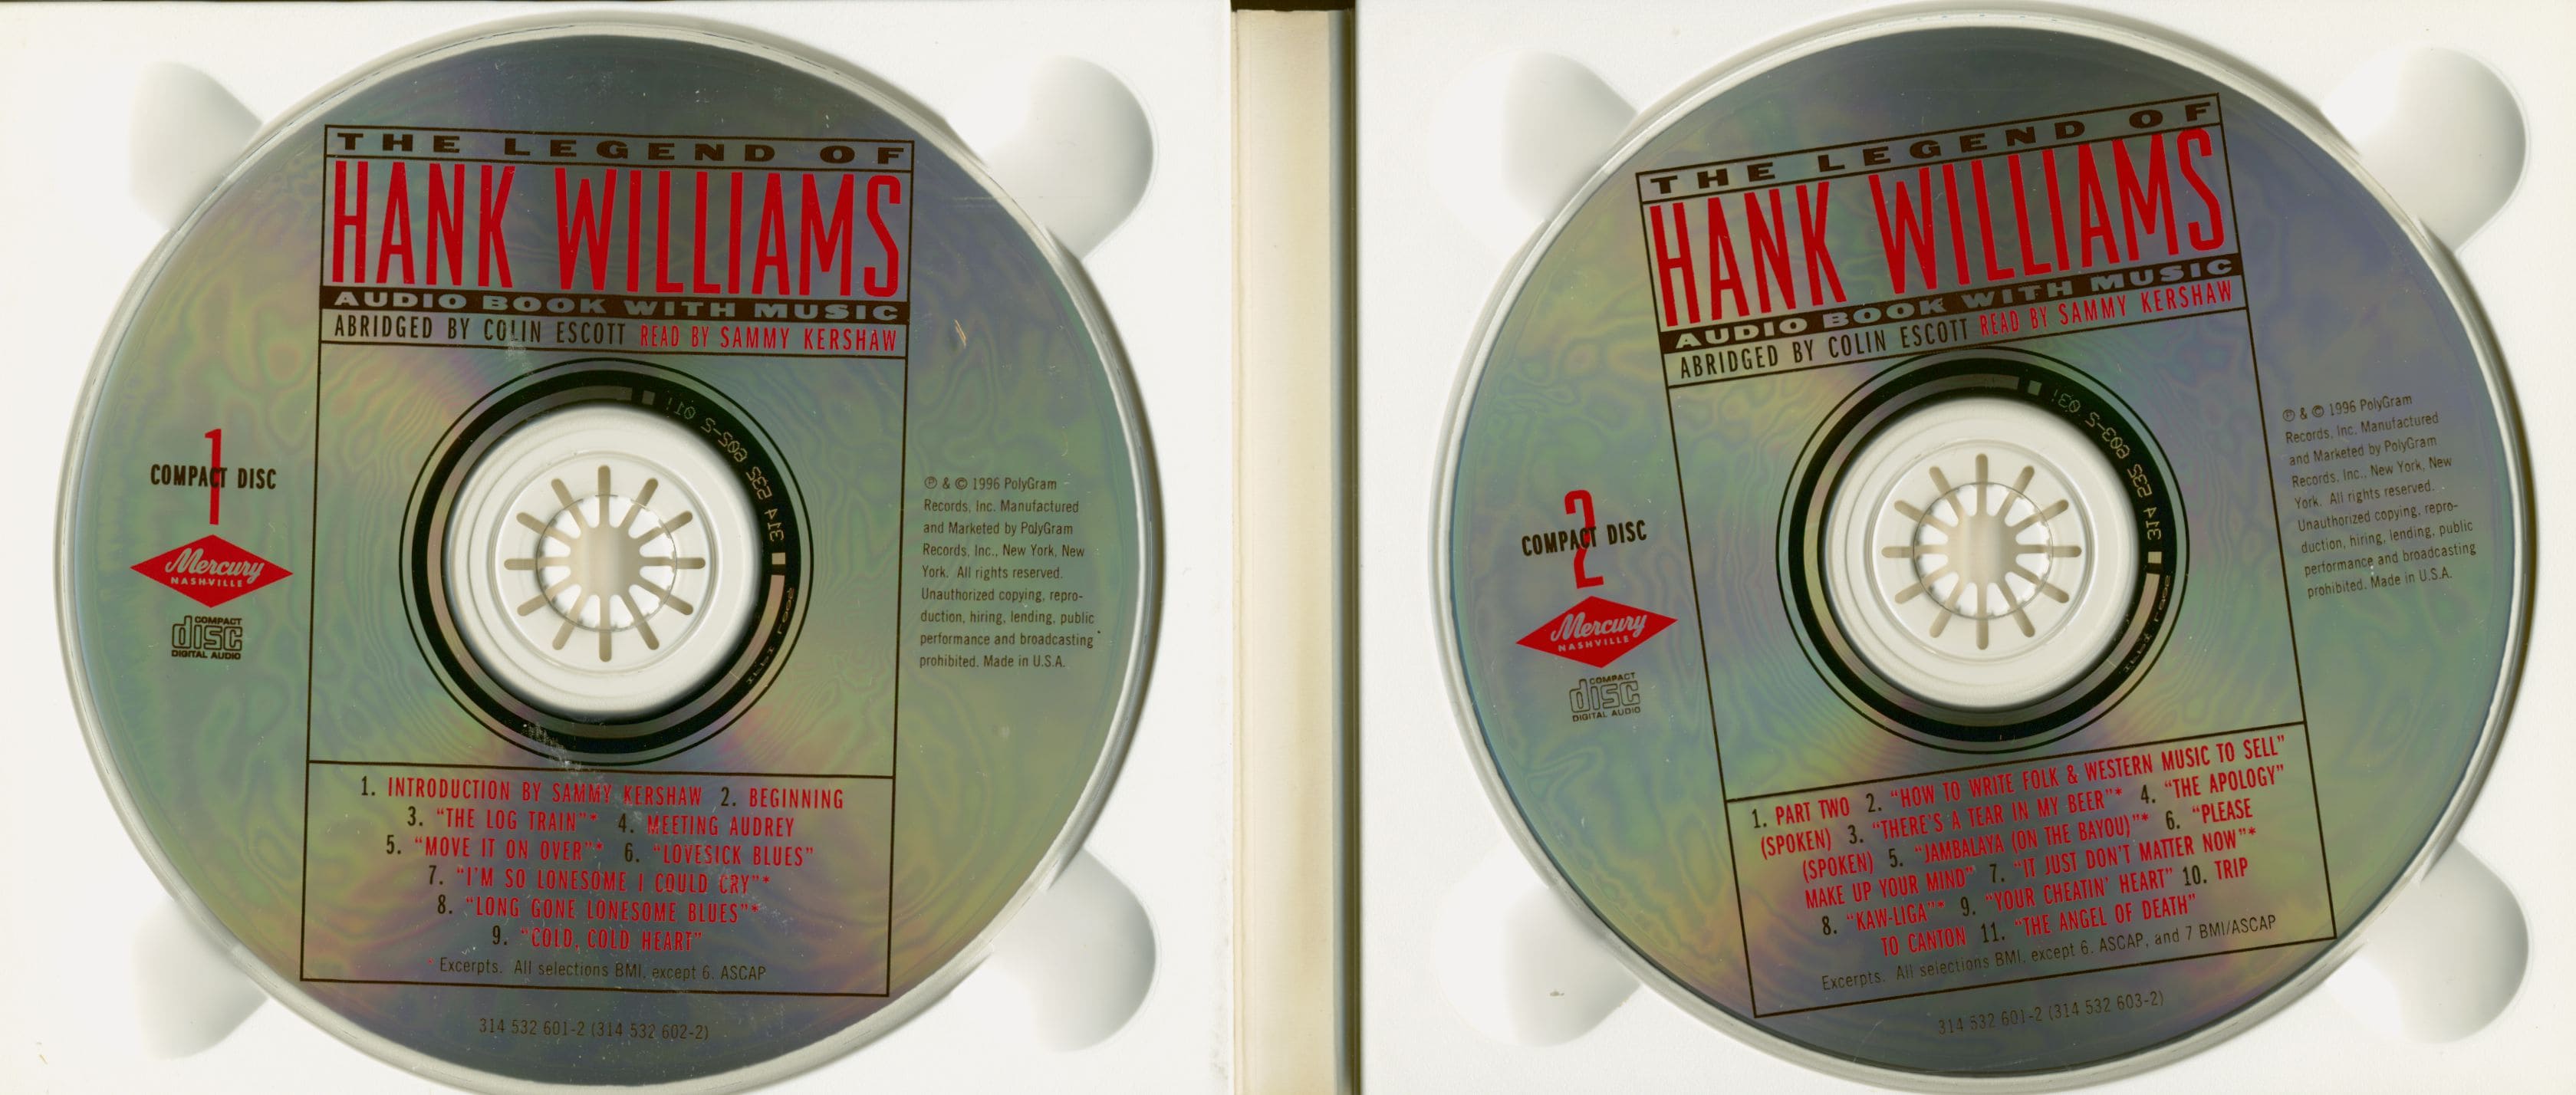 Hank Williams CD: The Legend Of Hank Williams - Audio Book with